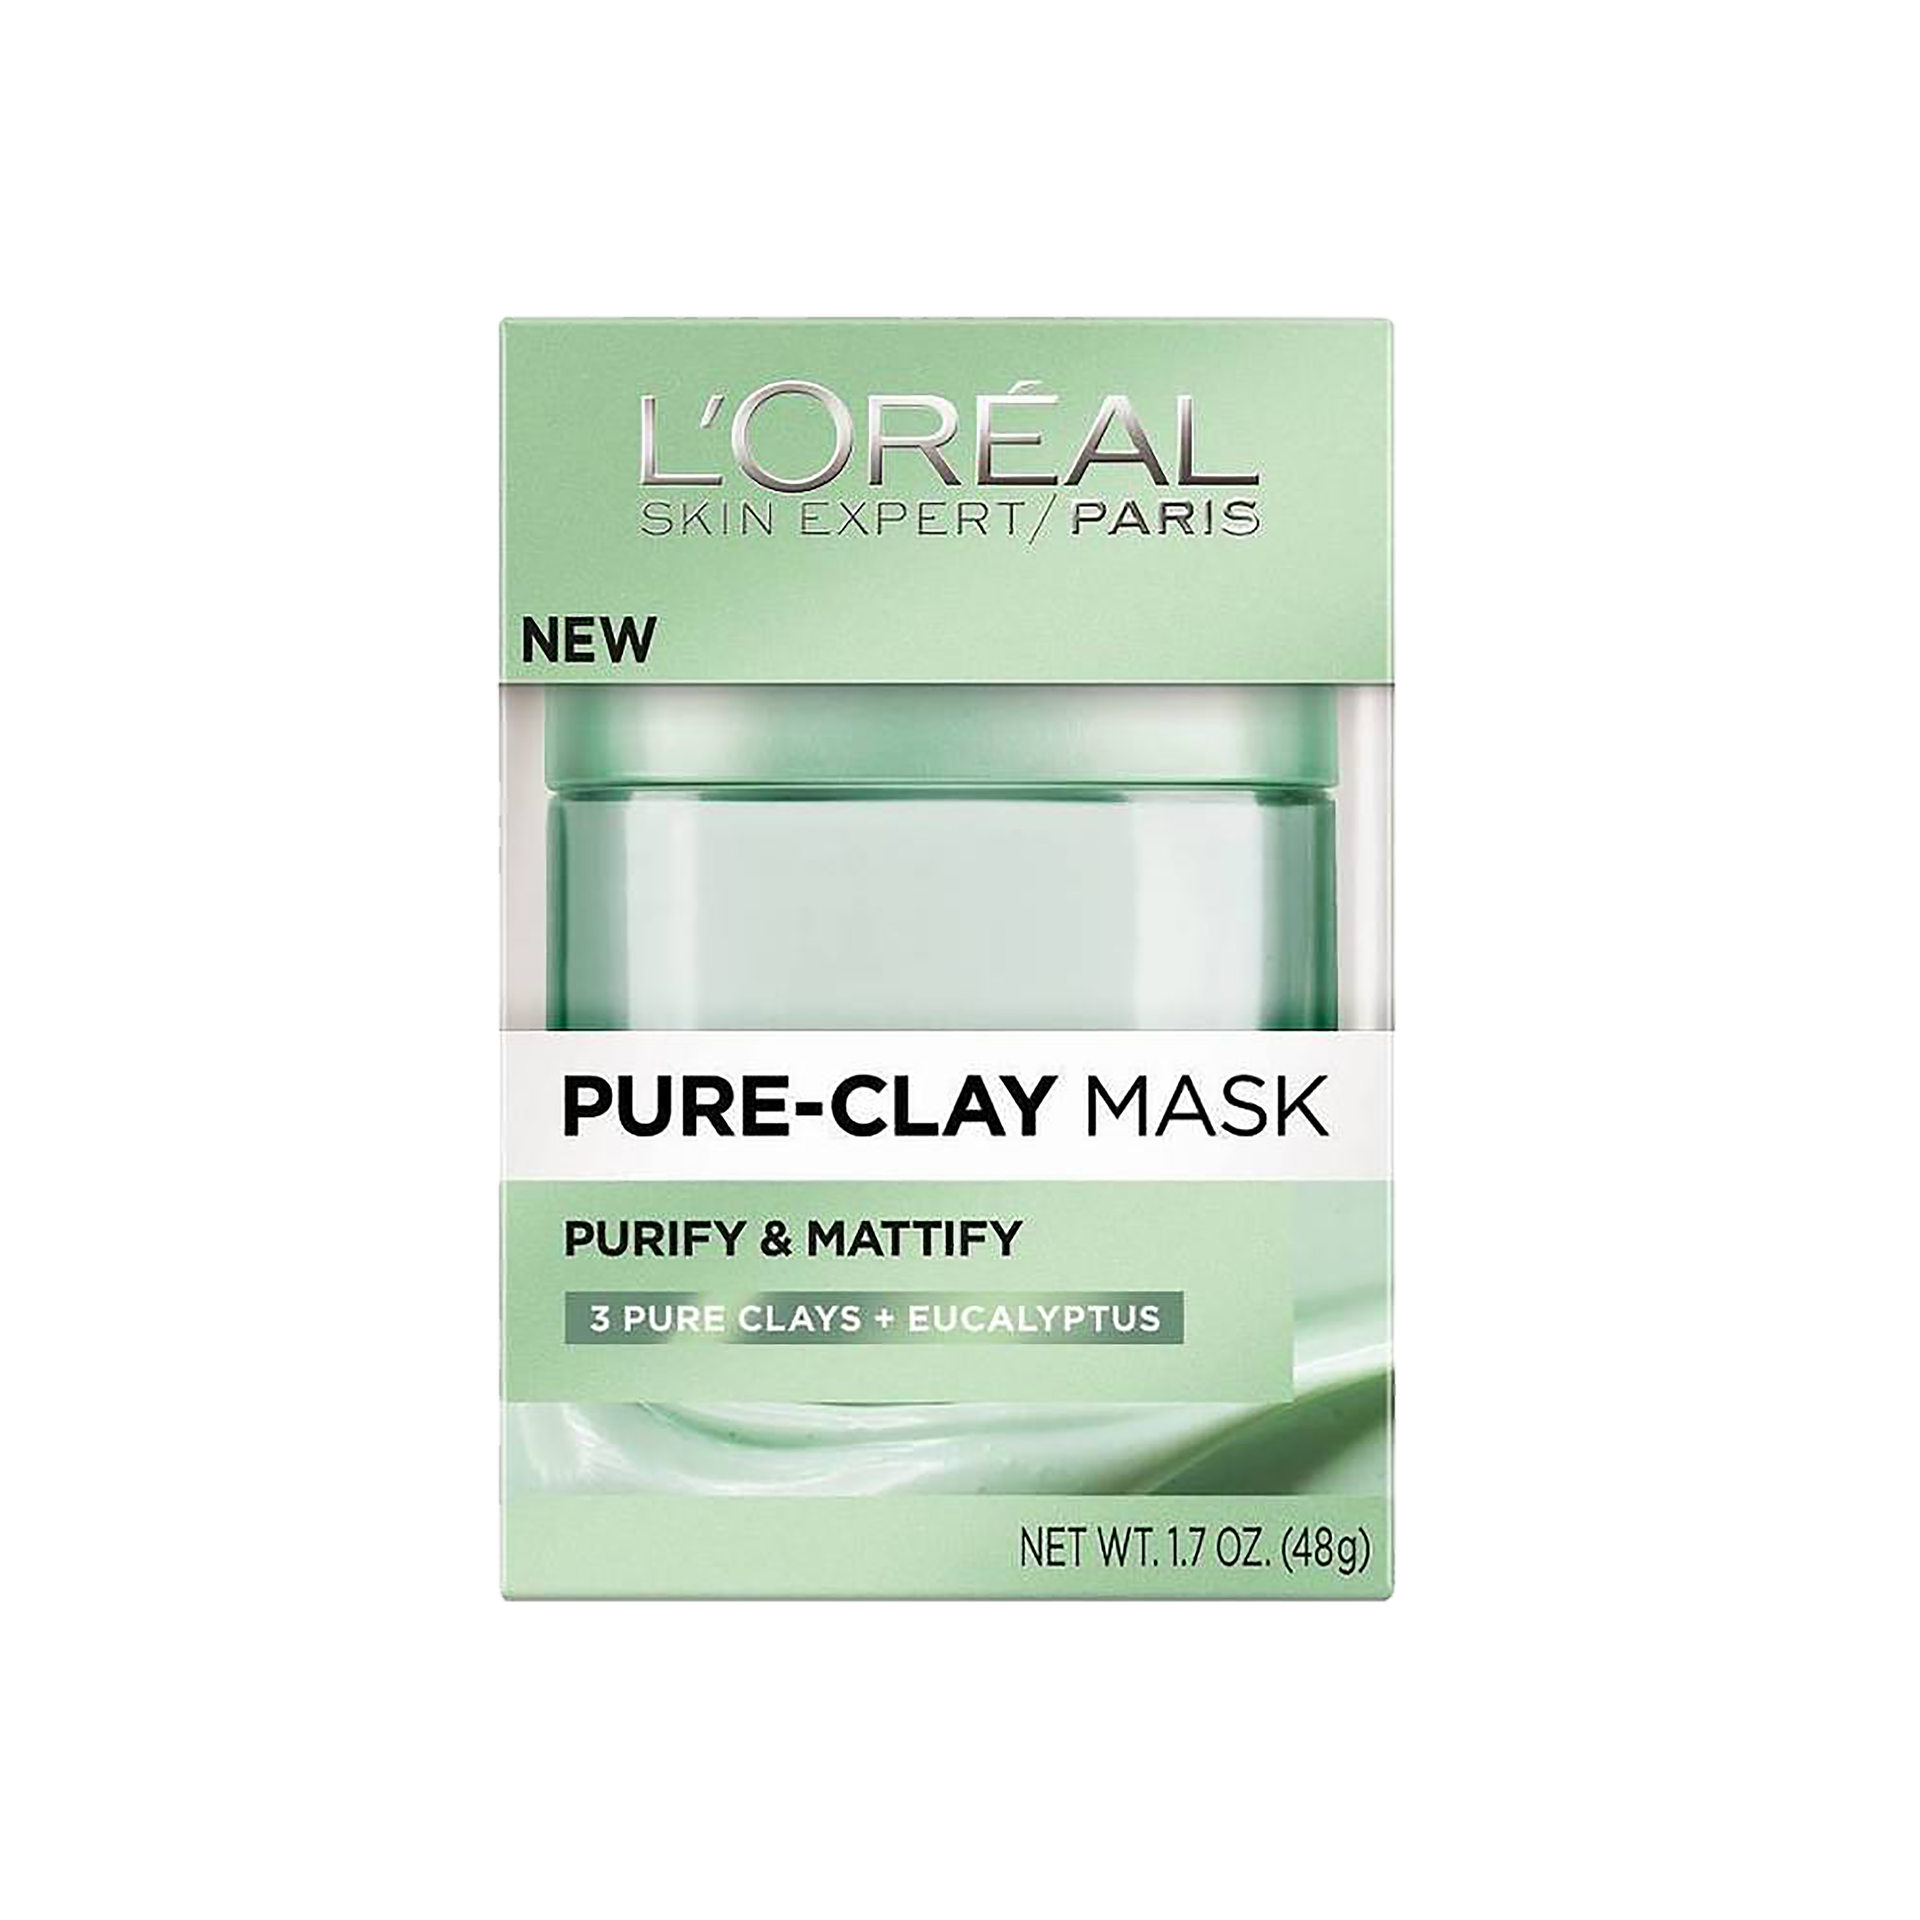 L'Oreal Pure Clay Mask Packaging Case | Packaging